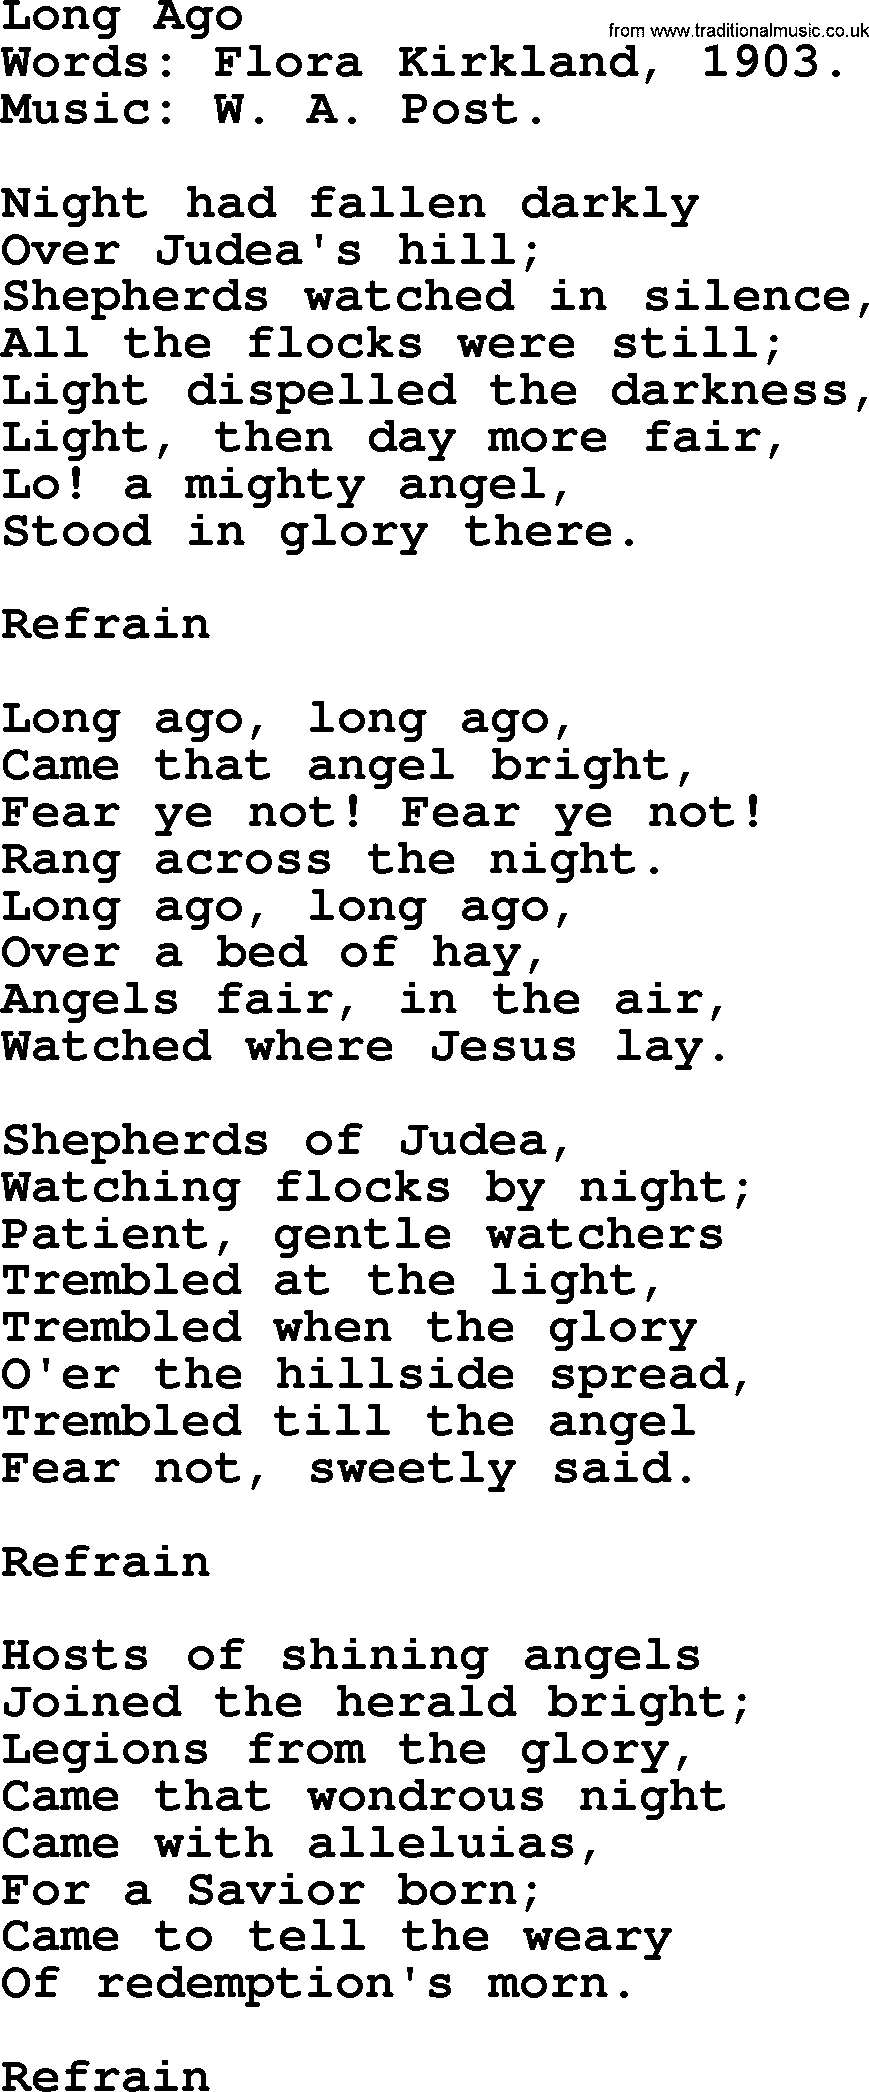 Christmas Hymns, Carols and Songs, title: Long Ago - complete lyrics, and PDF